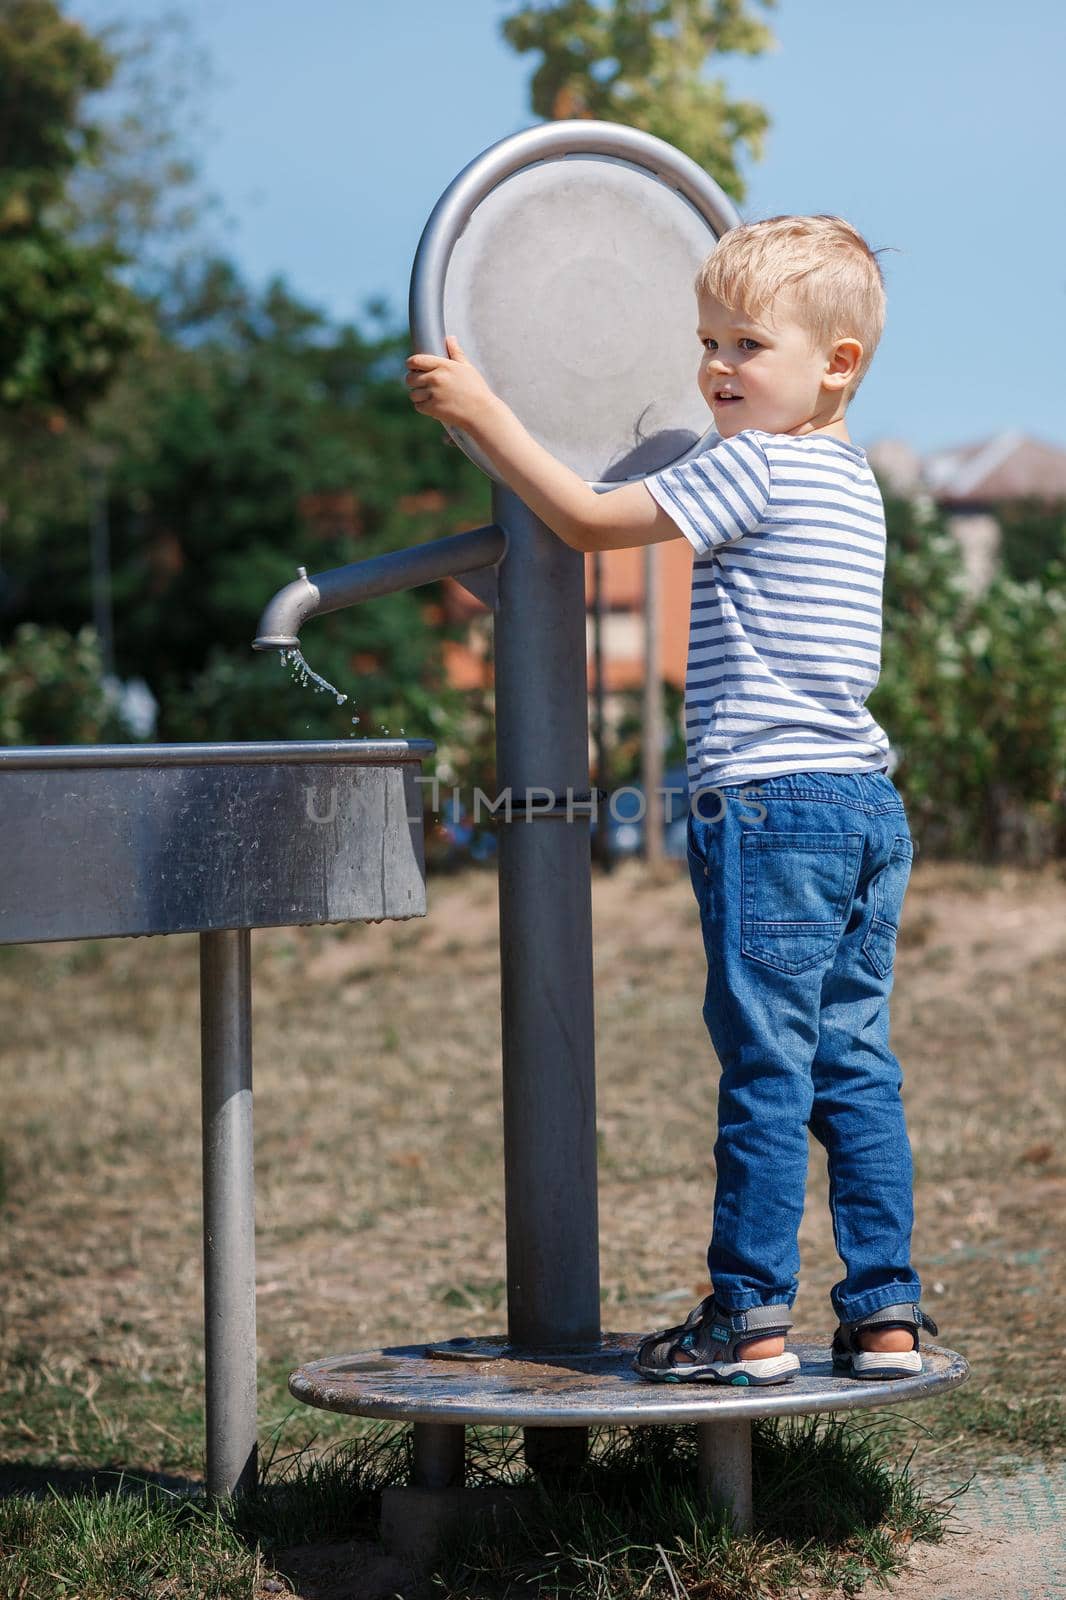 A happy little boy plays with a big water tap in a city park. Special water equipment for children's games on a hot summer day outdoors.